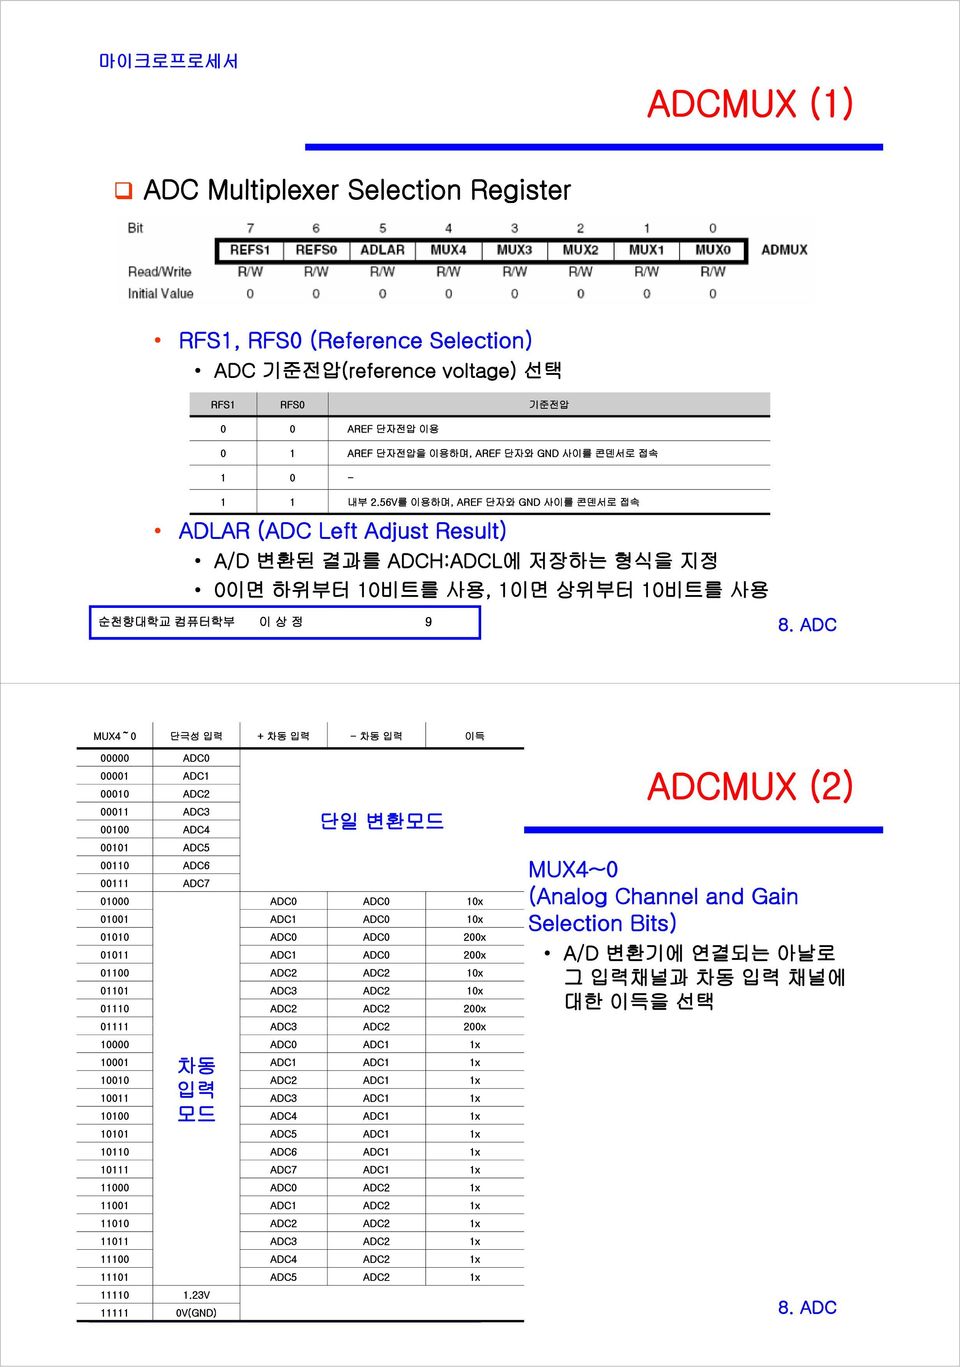 ADC0 0000 ADC ADCMUX (2) 0000 ADC2 000 ADC3 0000 ADC4 000 ADC5 단일 변환모드 000 ADC6 MUX4~0 00 ADC7 0000 ADC0 ADC0 0x (Analog Channel and Gain 000 ADC ADC0 0x Selection Bits) 000 ADC0 ADC0 200x 00 ADC